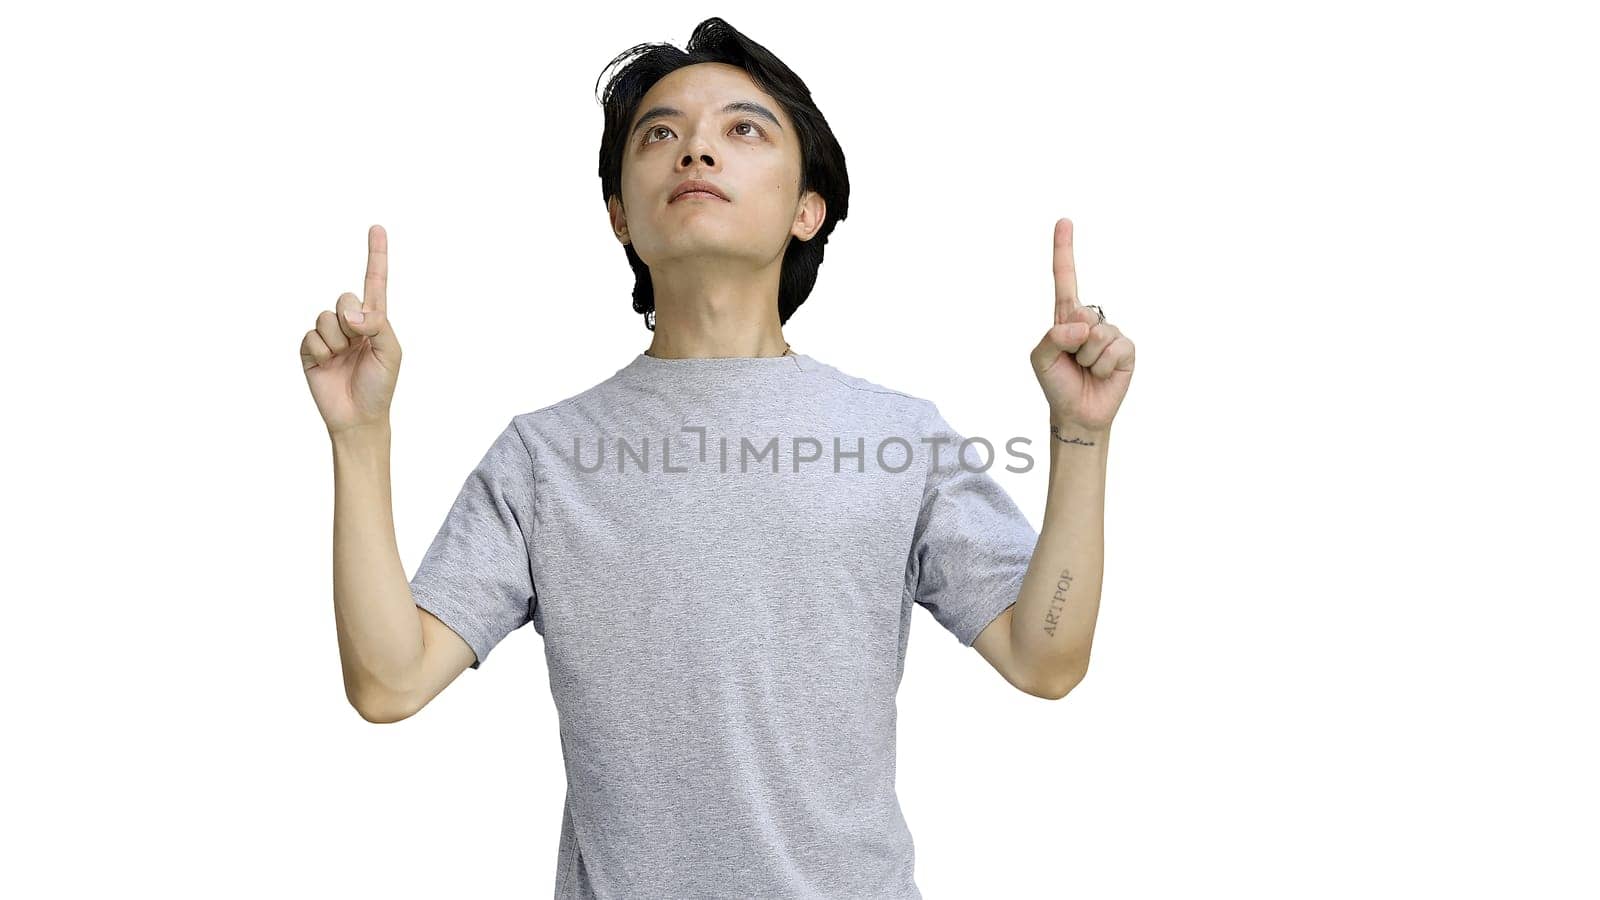 Guy in a gray T-shirt, on a white background, close-up, pointing up.